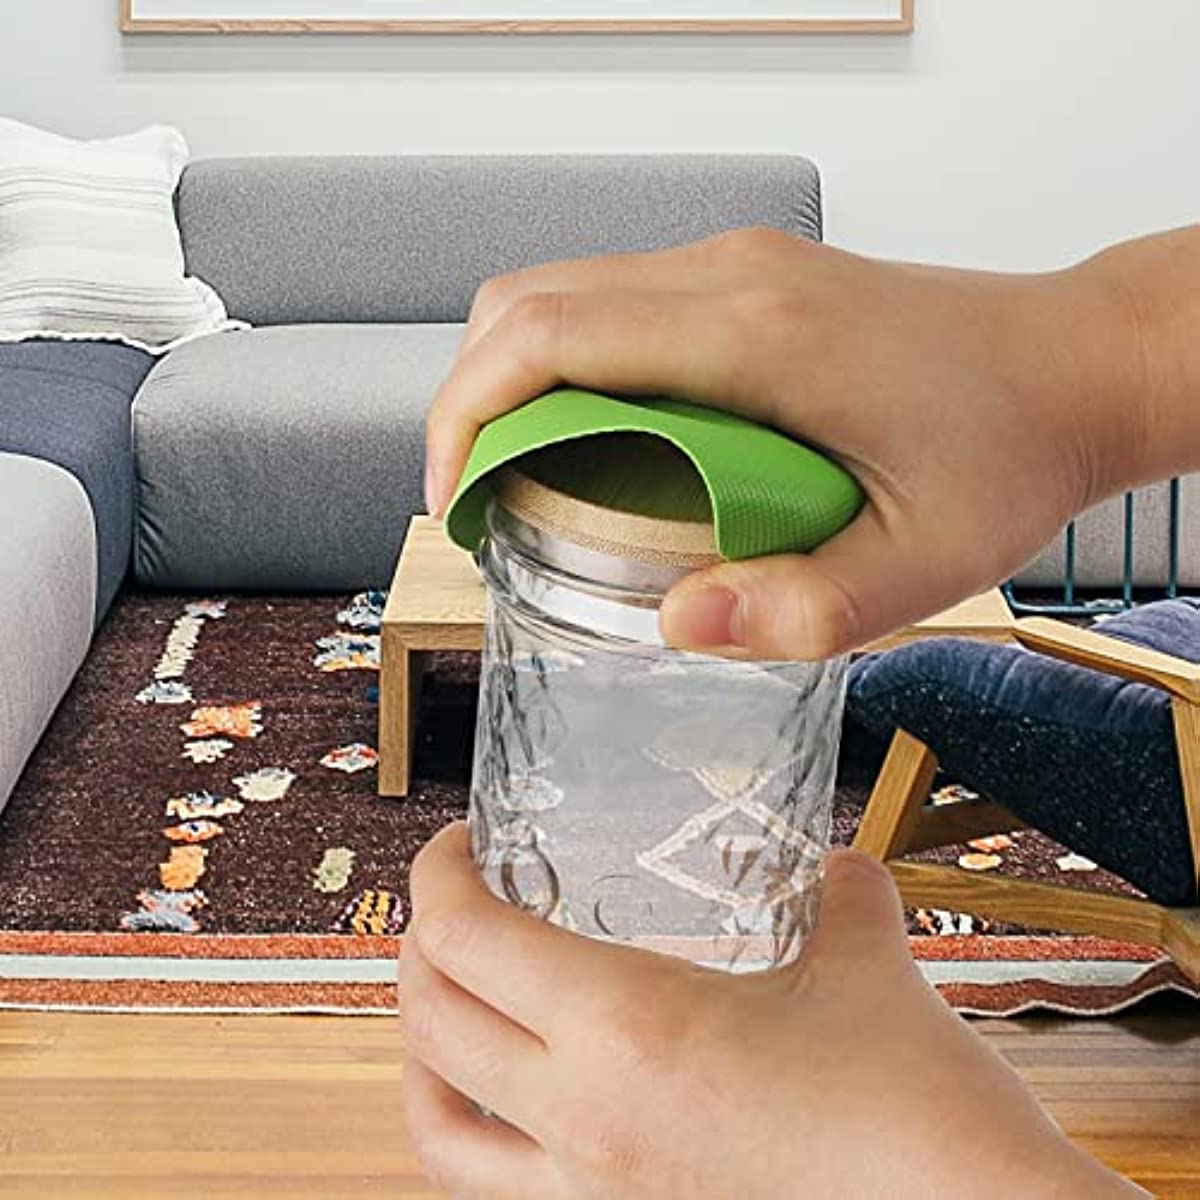 Jar Opener with Rubber Grip for Seniors with Arthritis and Weak